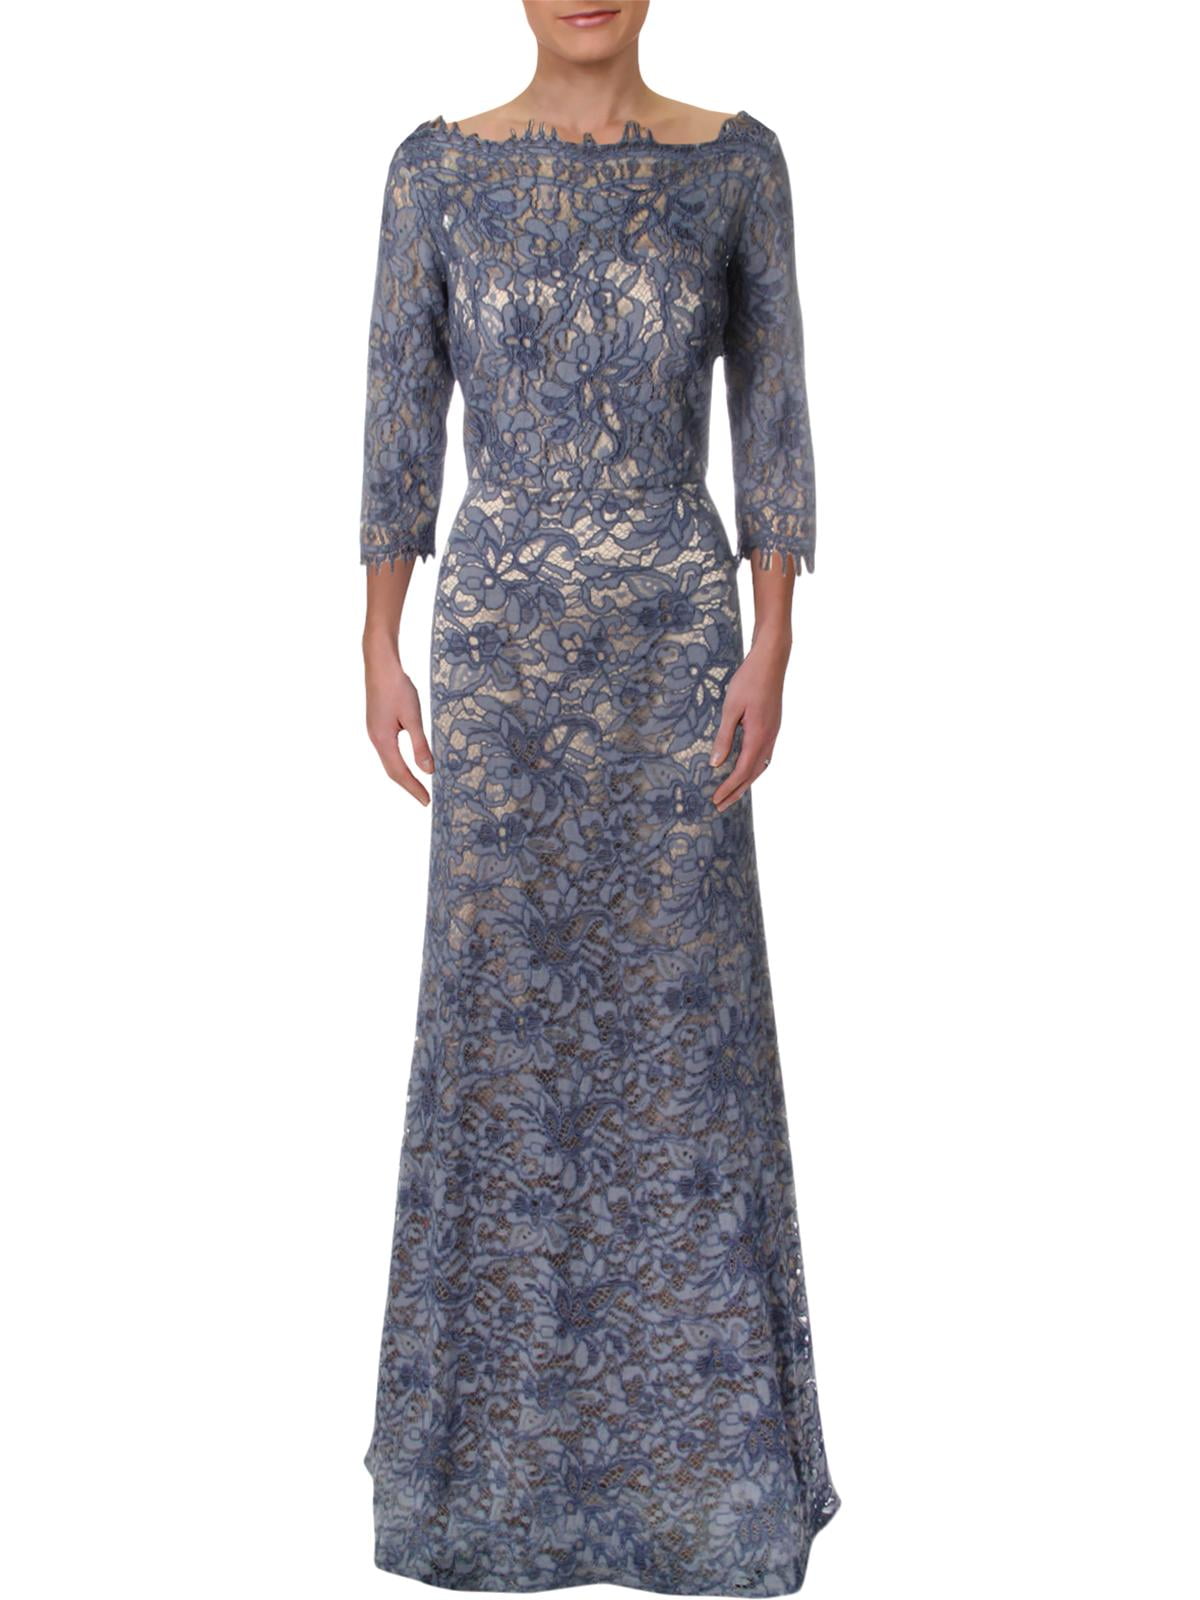 Js Collections - JS Collections Womens Lace Formal Evening Dress ...